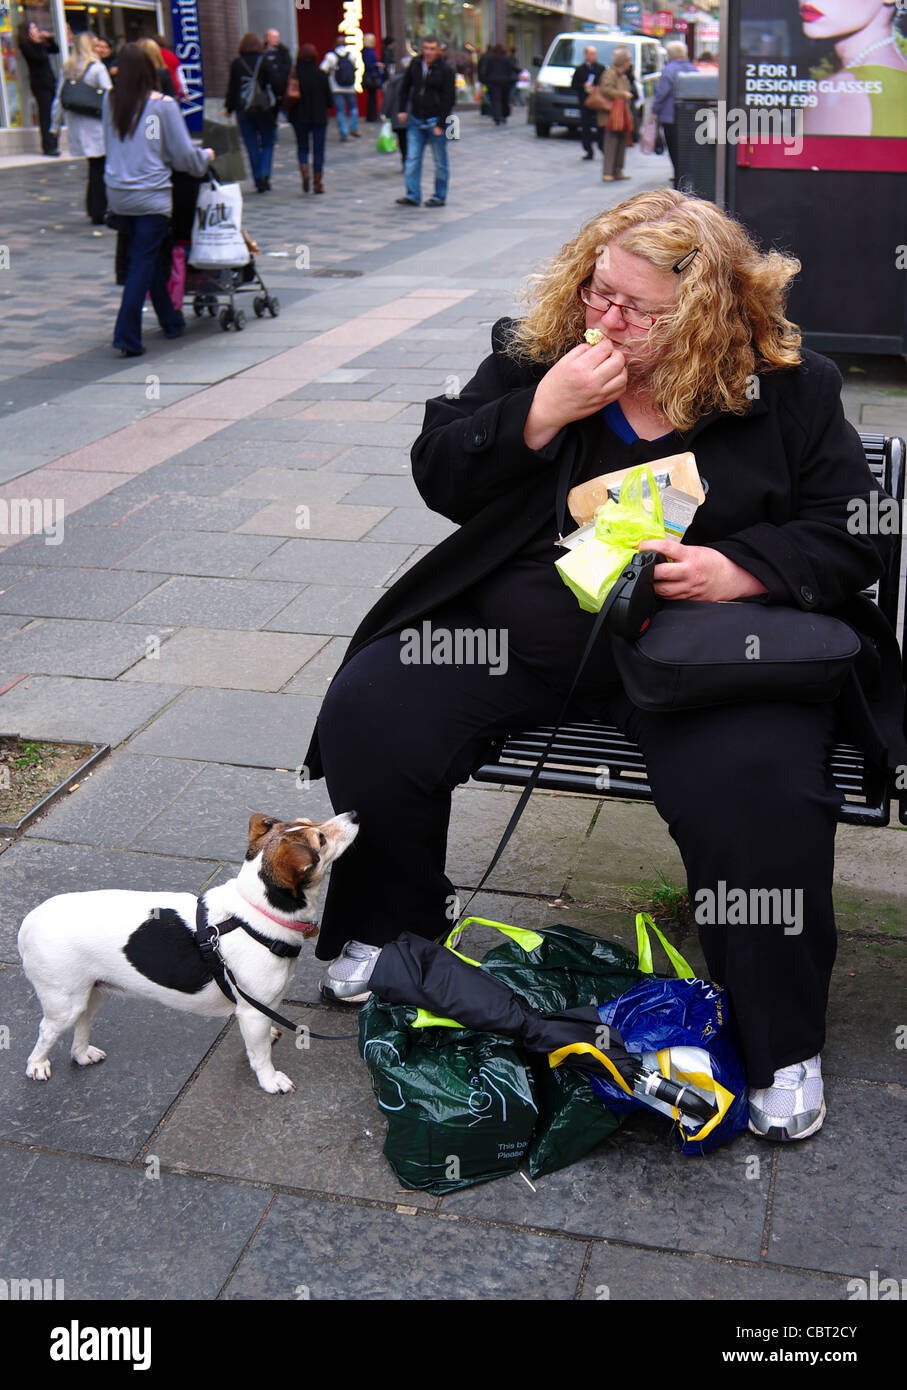 Woman sitting on a public bench in Sauchiehall Street, Glasgow eating a sandwich with her small dog looking on. Scotland, UK, Stock Photo